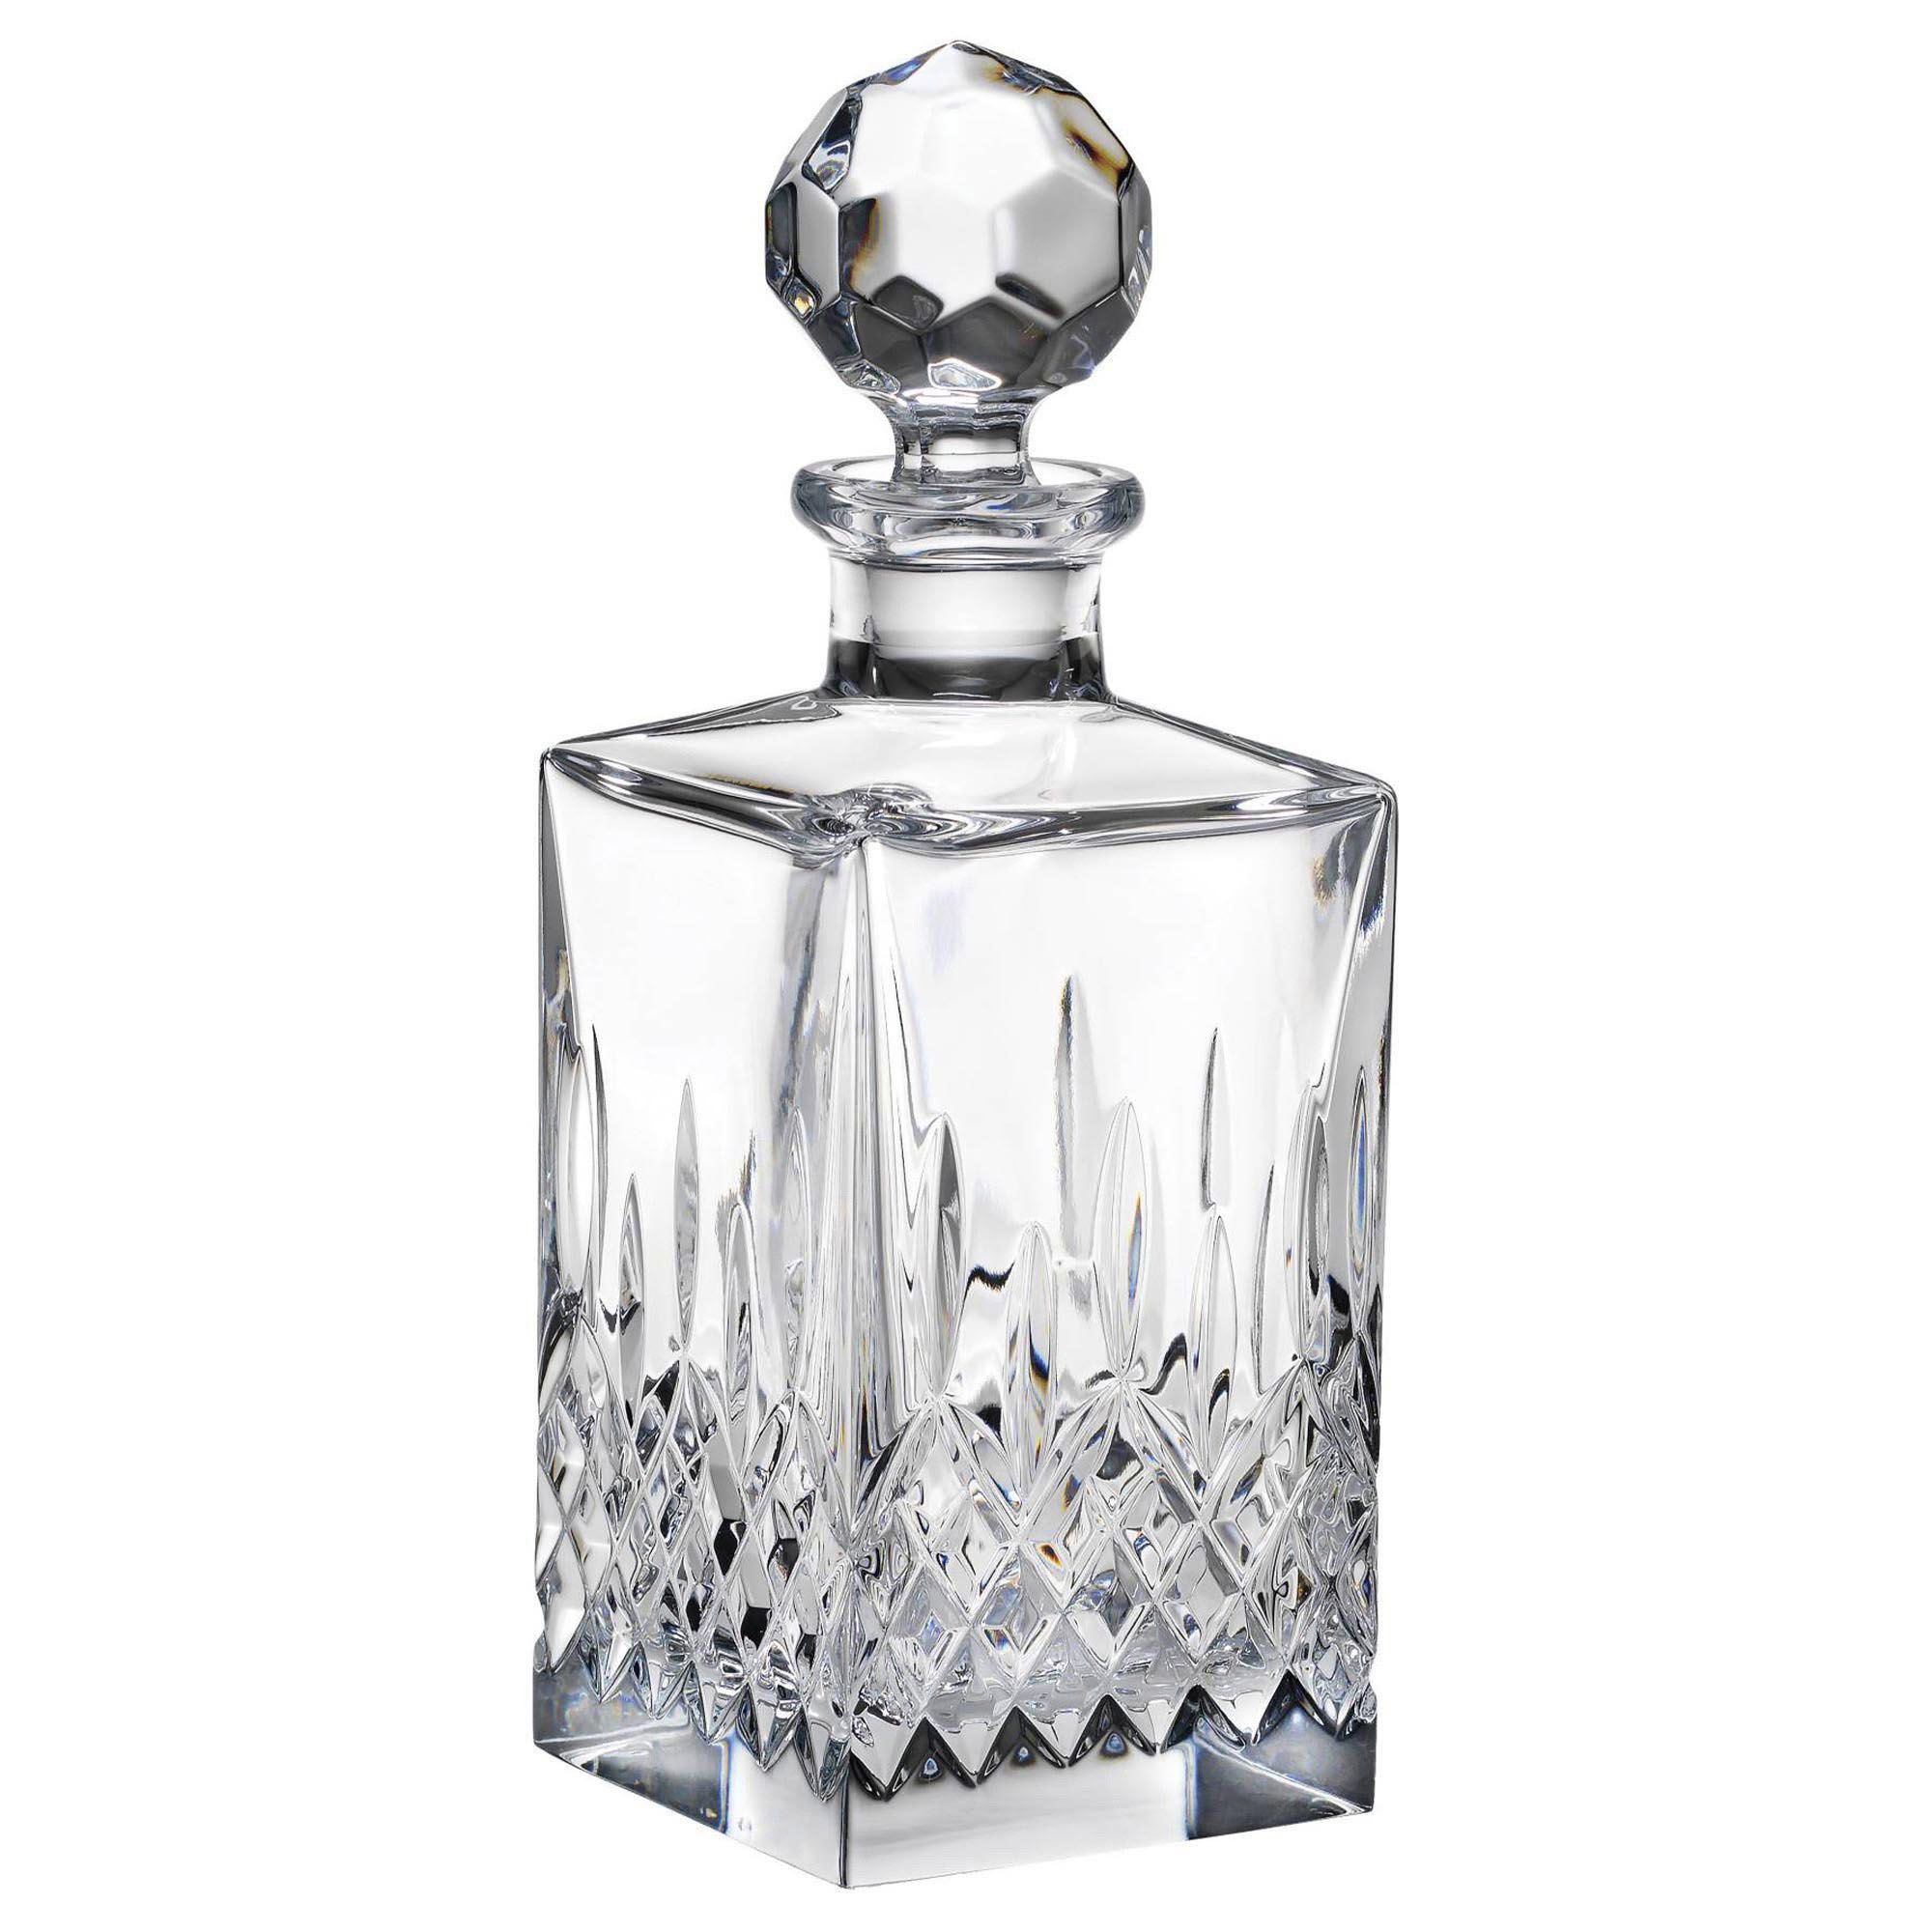 Lenox Reed & Barton Soho Modern Classic Clear Glass Square Decanter | Kathy Kuo Home